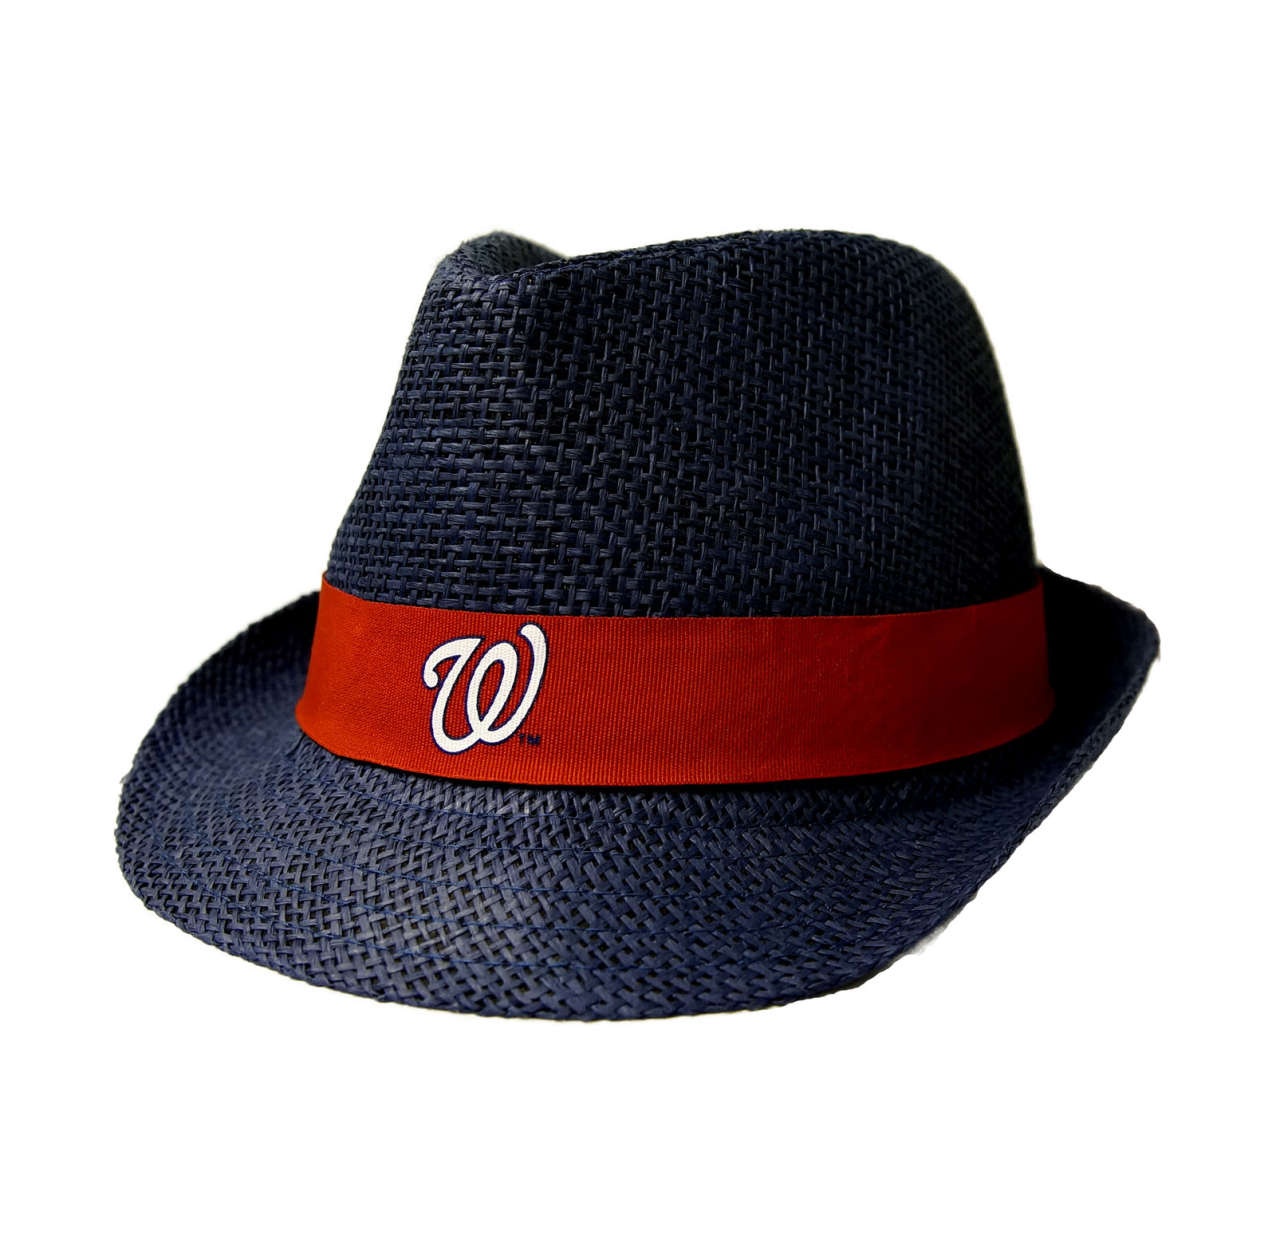 The Nationals-themed fedora will be available July 26. (Courtesy Washington Nationals)